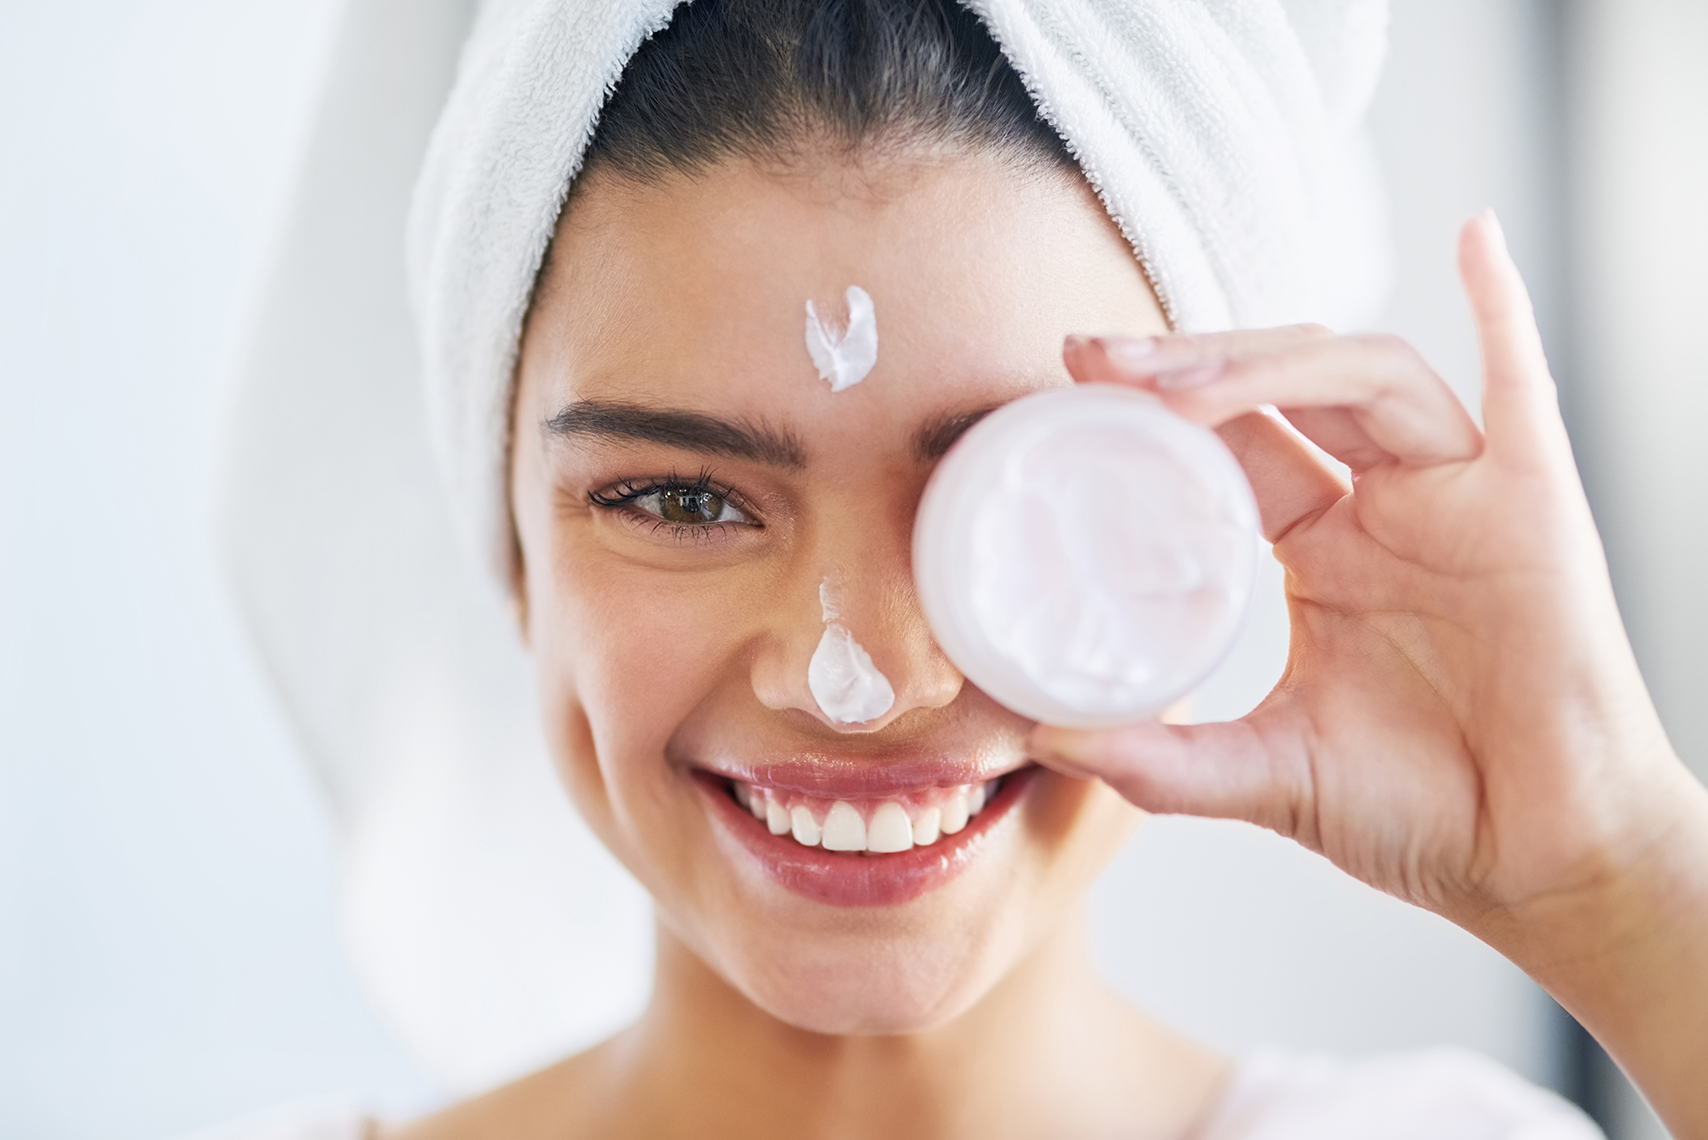 The great effect of salt for beauty care